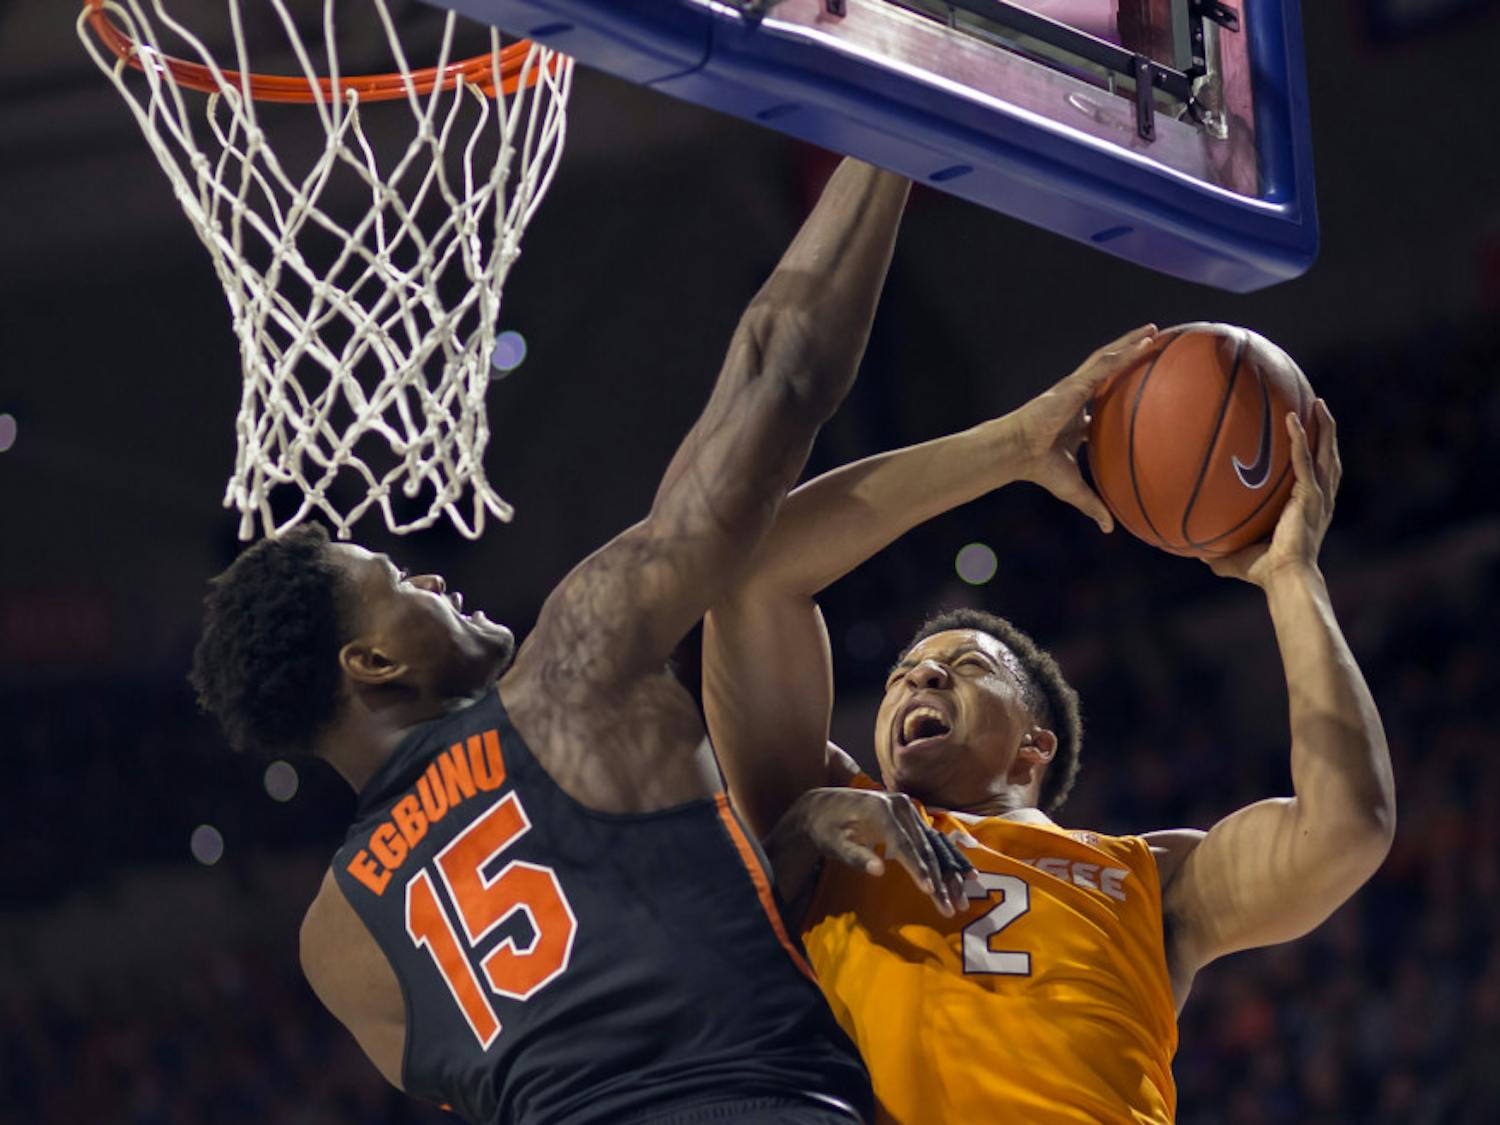 Florida center John Egbunu (15) fouls Tennessee forward Grant Williams (2) on this shot attempt during the first half of an NCAA college basketball game in Gainesville, Fla., Saturday, Jan. 7, 2017. (AP Photo/Ron Irby)